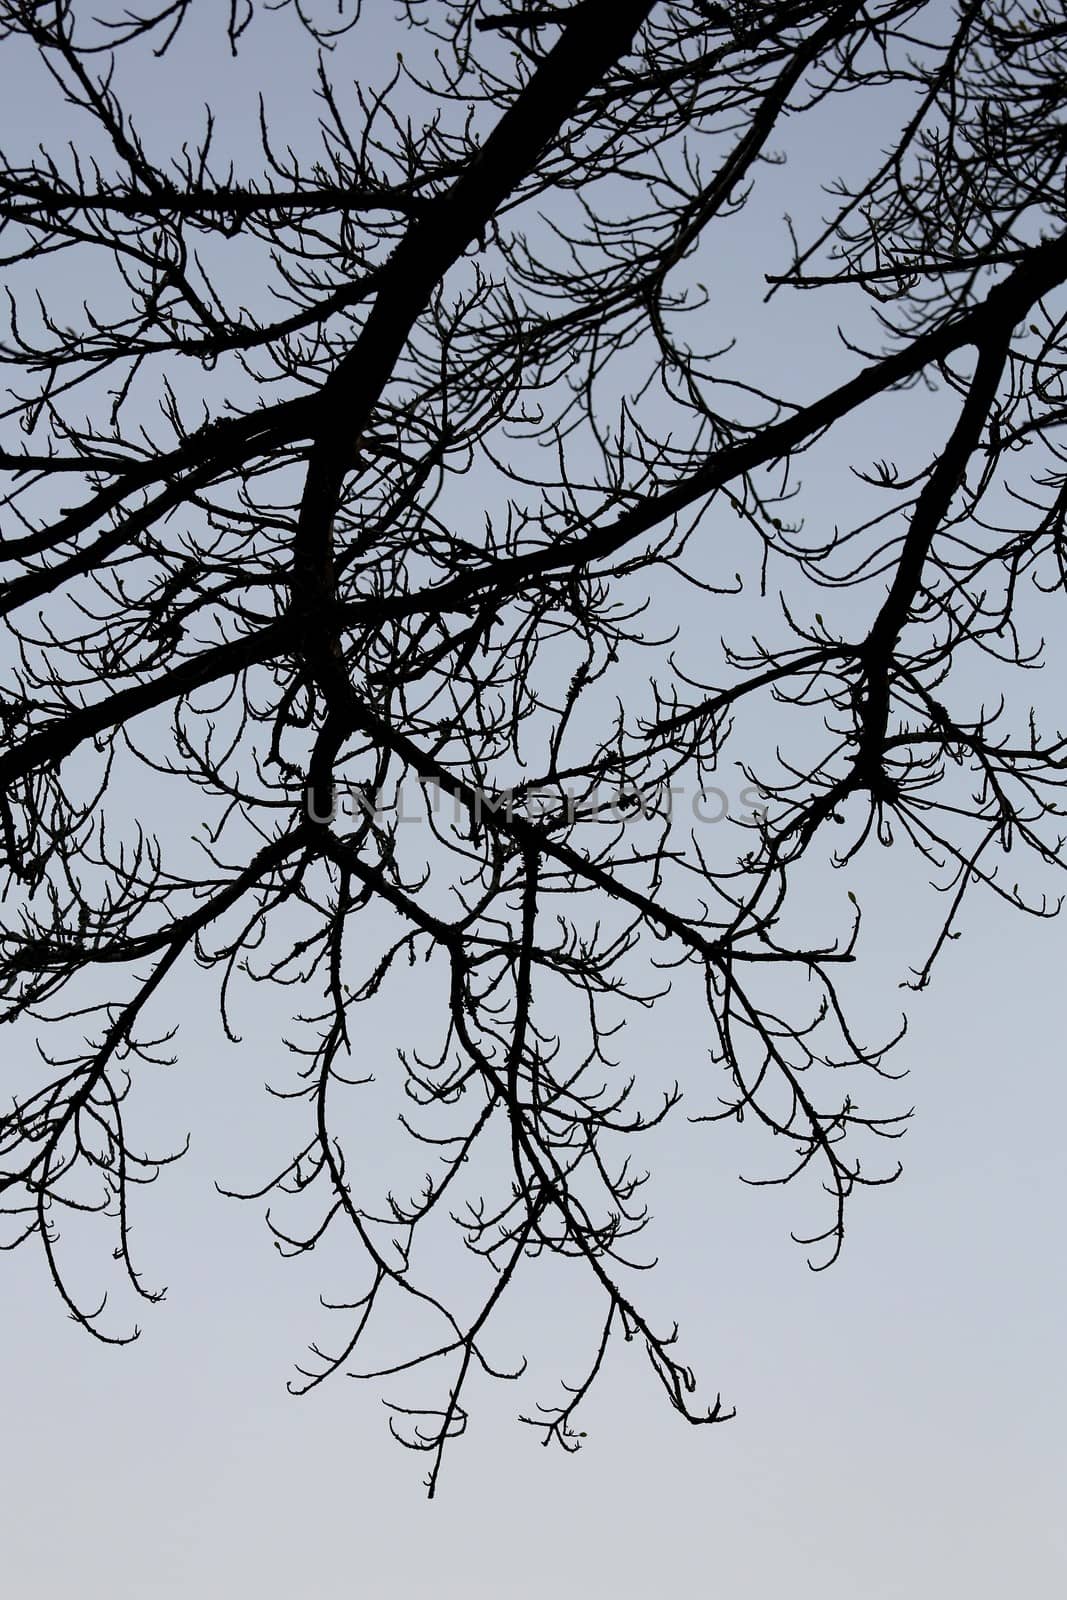 Silhouette of a trees intricate branch system